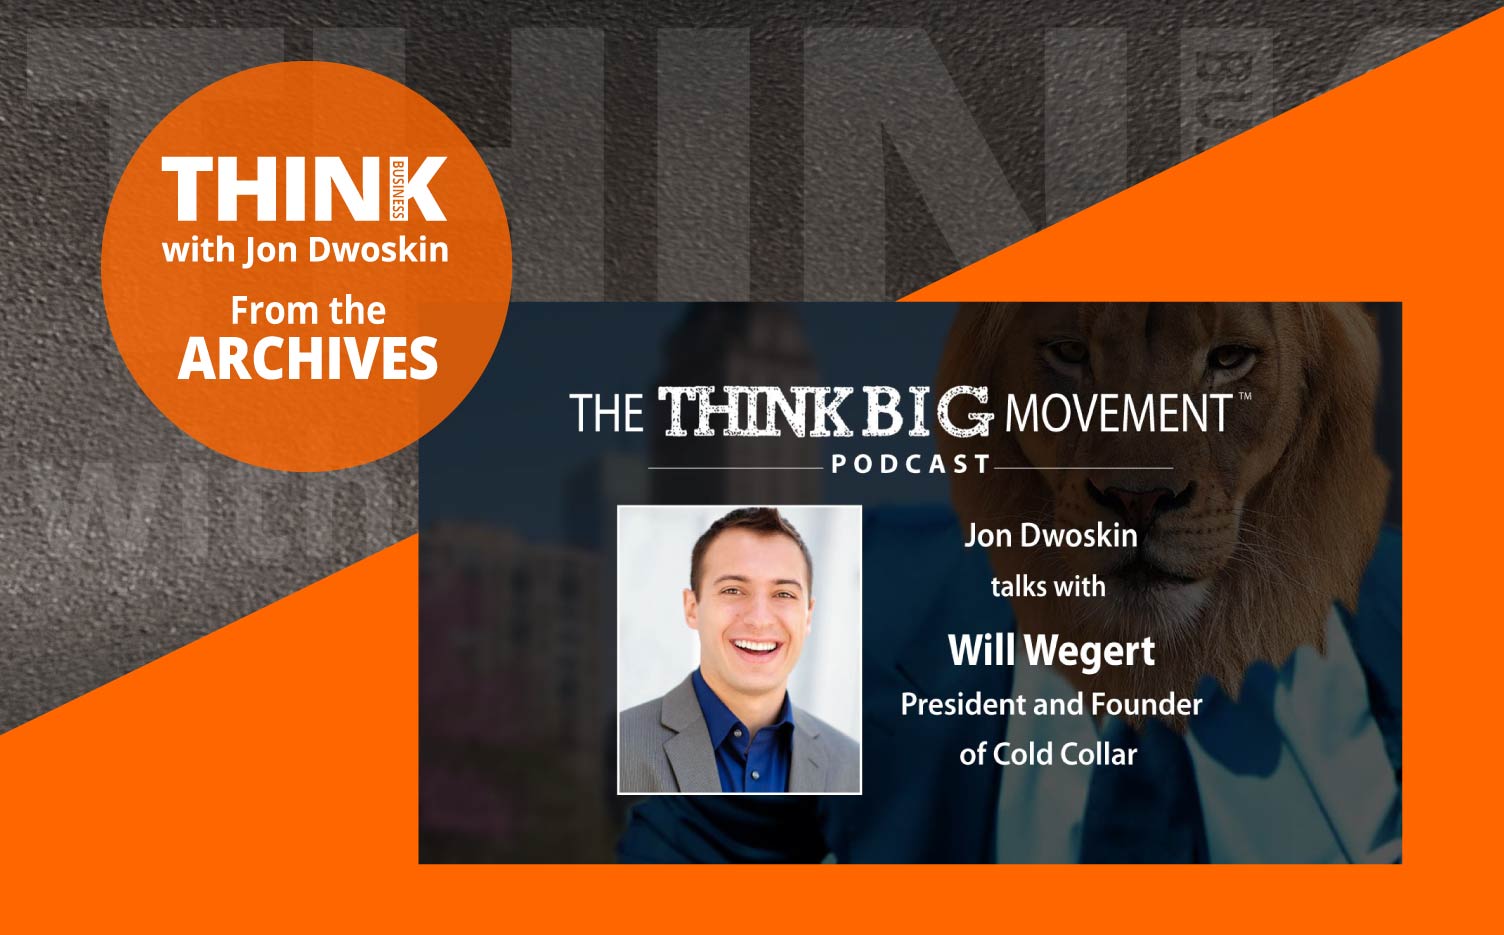 THINK Business Podcast: Jon Dwoskin Interviews Will Wegert, President and Founder of Cold Collar